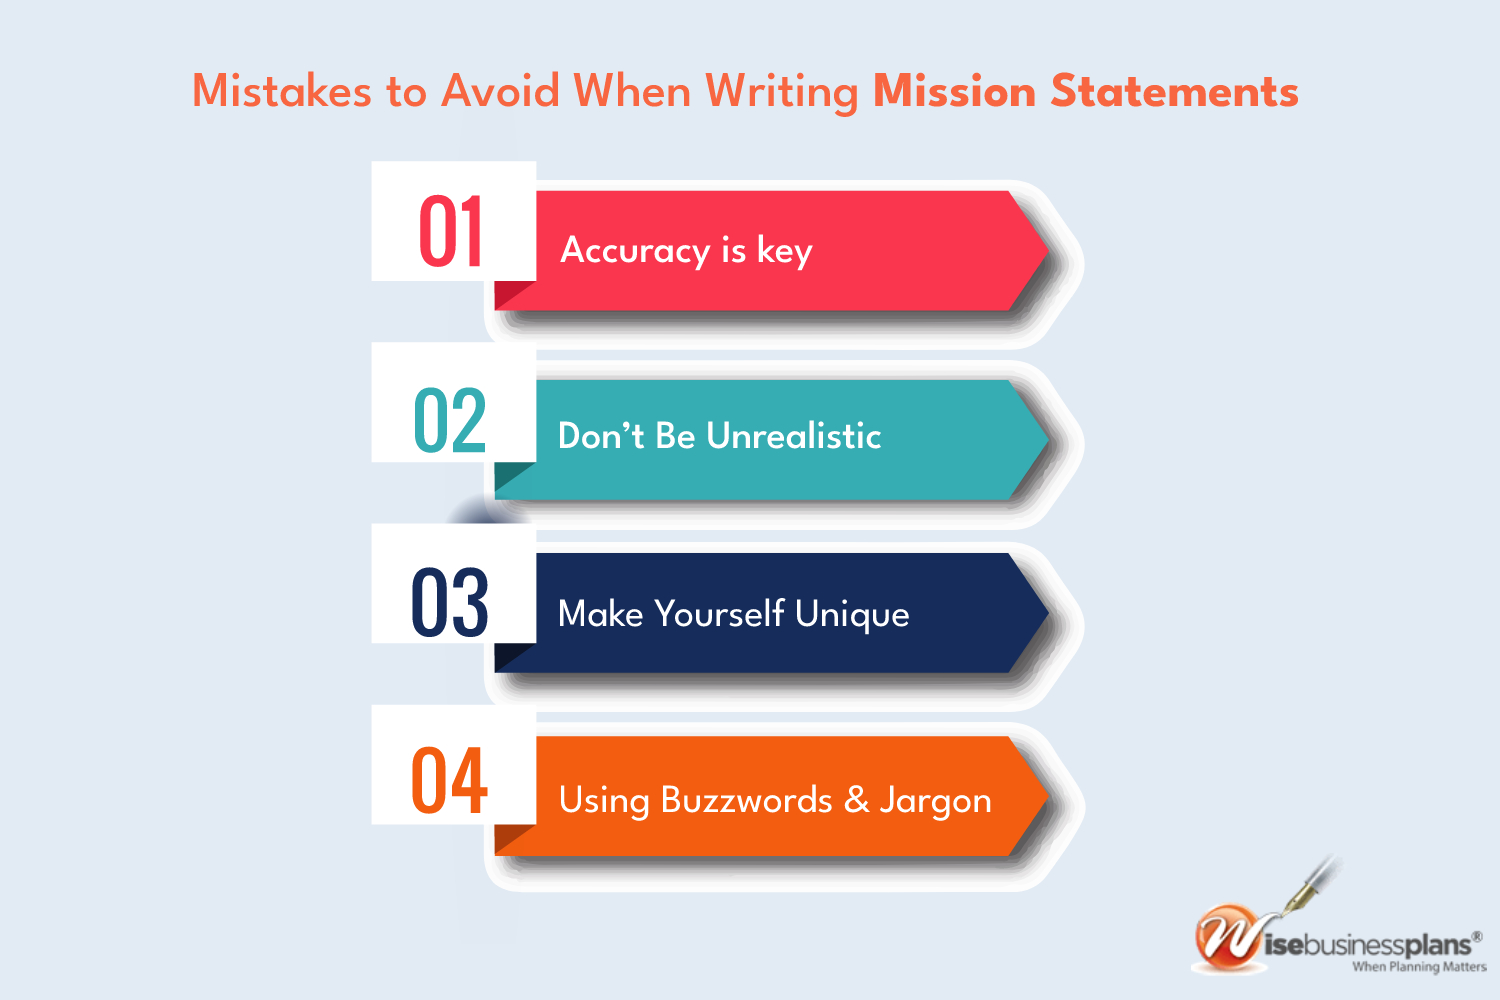 Mistakes to avoid when writing mission statements